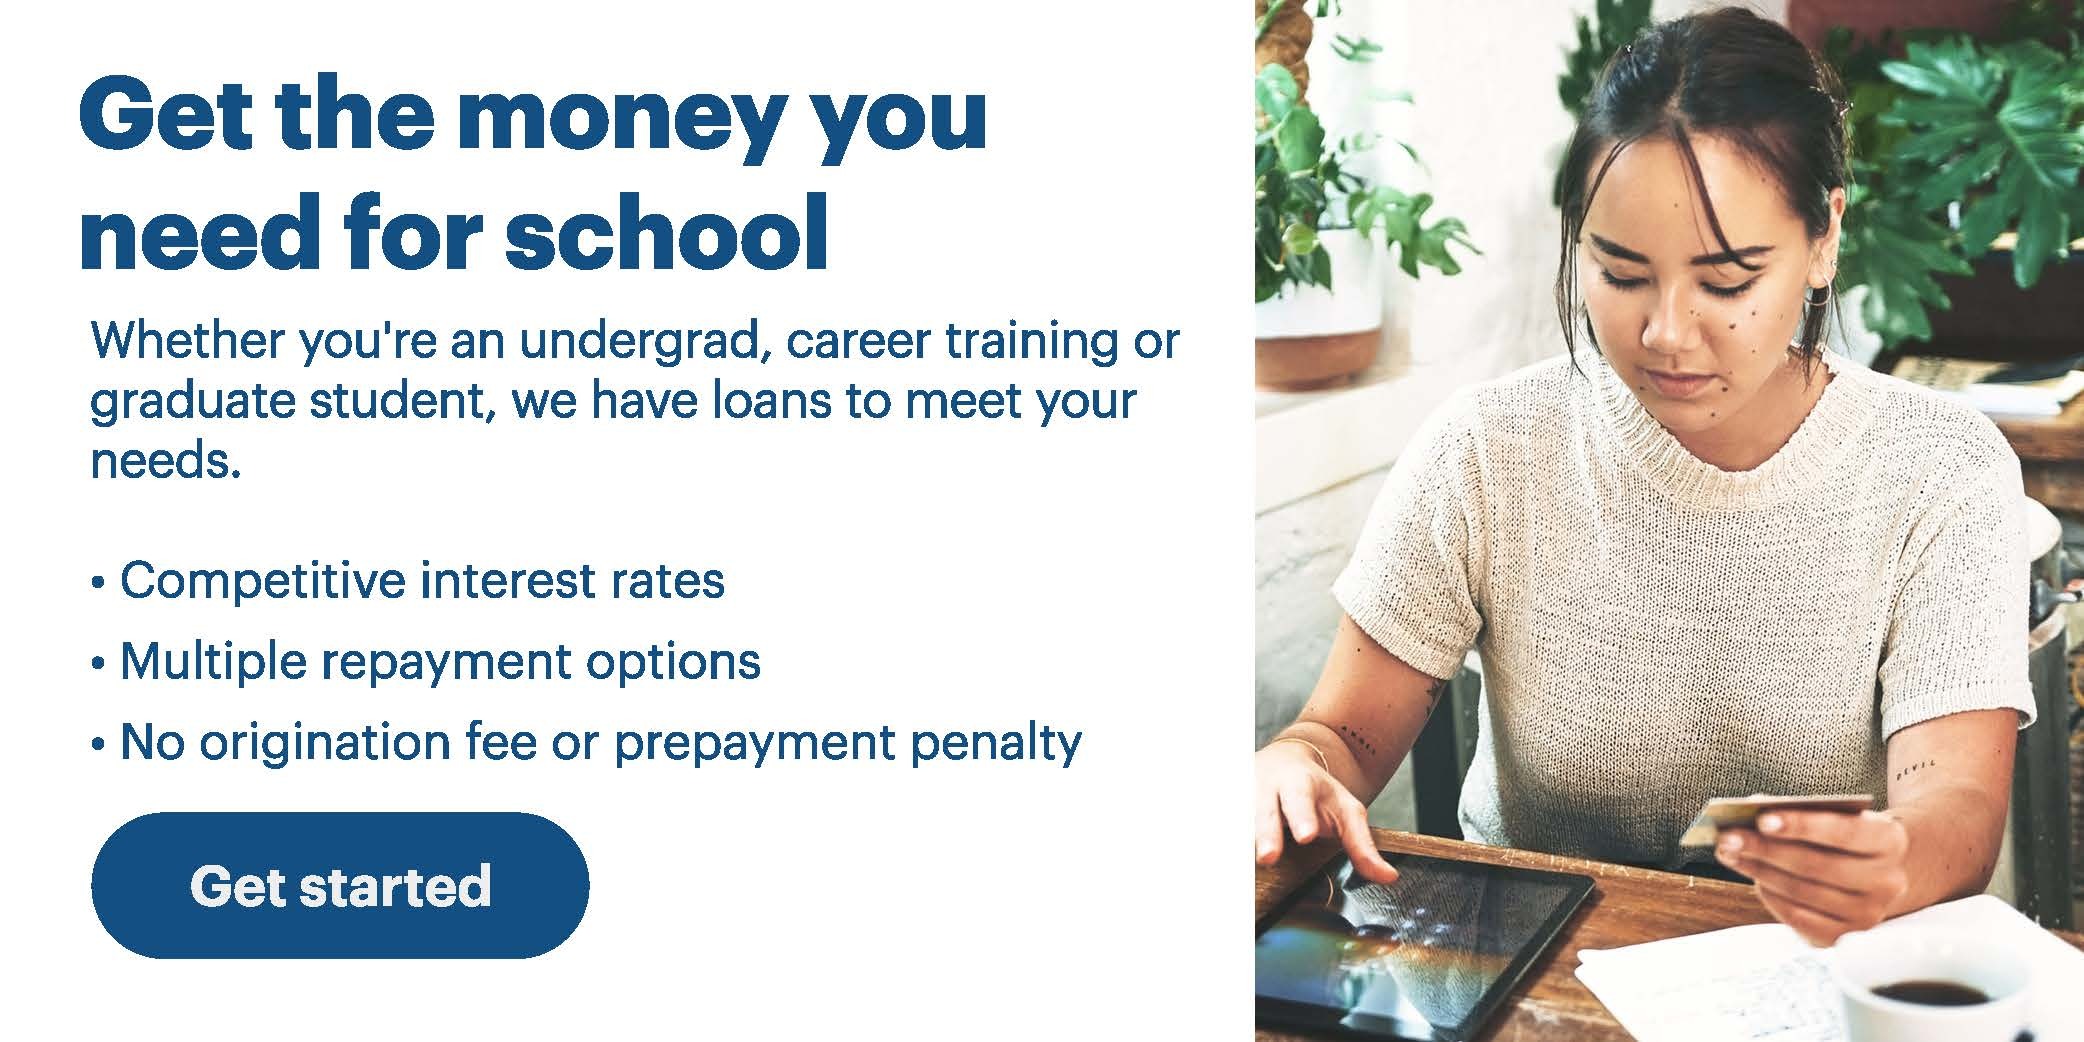 International Institute of Cosmetology Private Student Loans by SallieMae for International Institute of Cosmetology Students in Wethersfield, CT